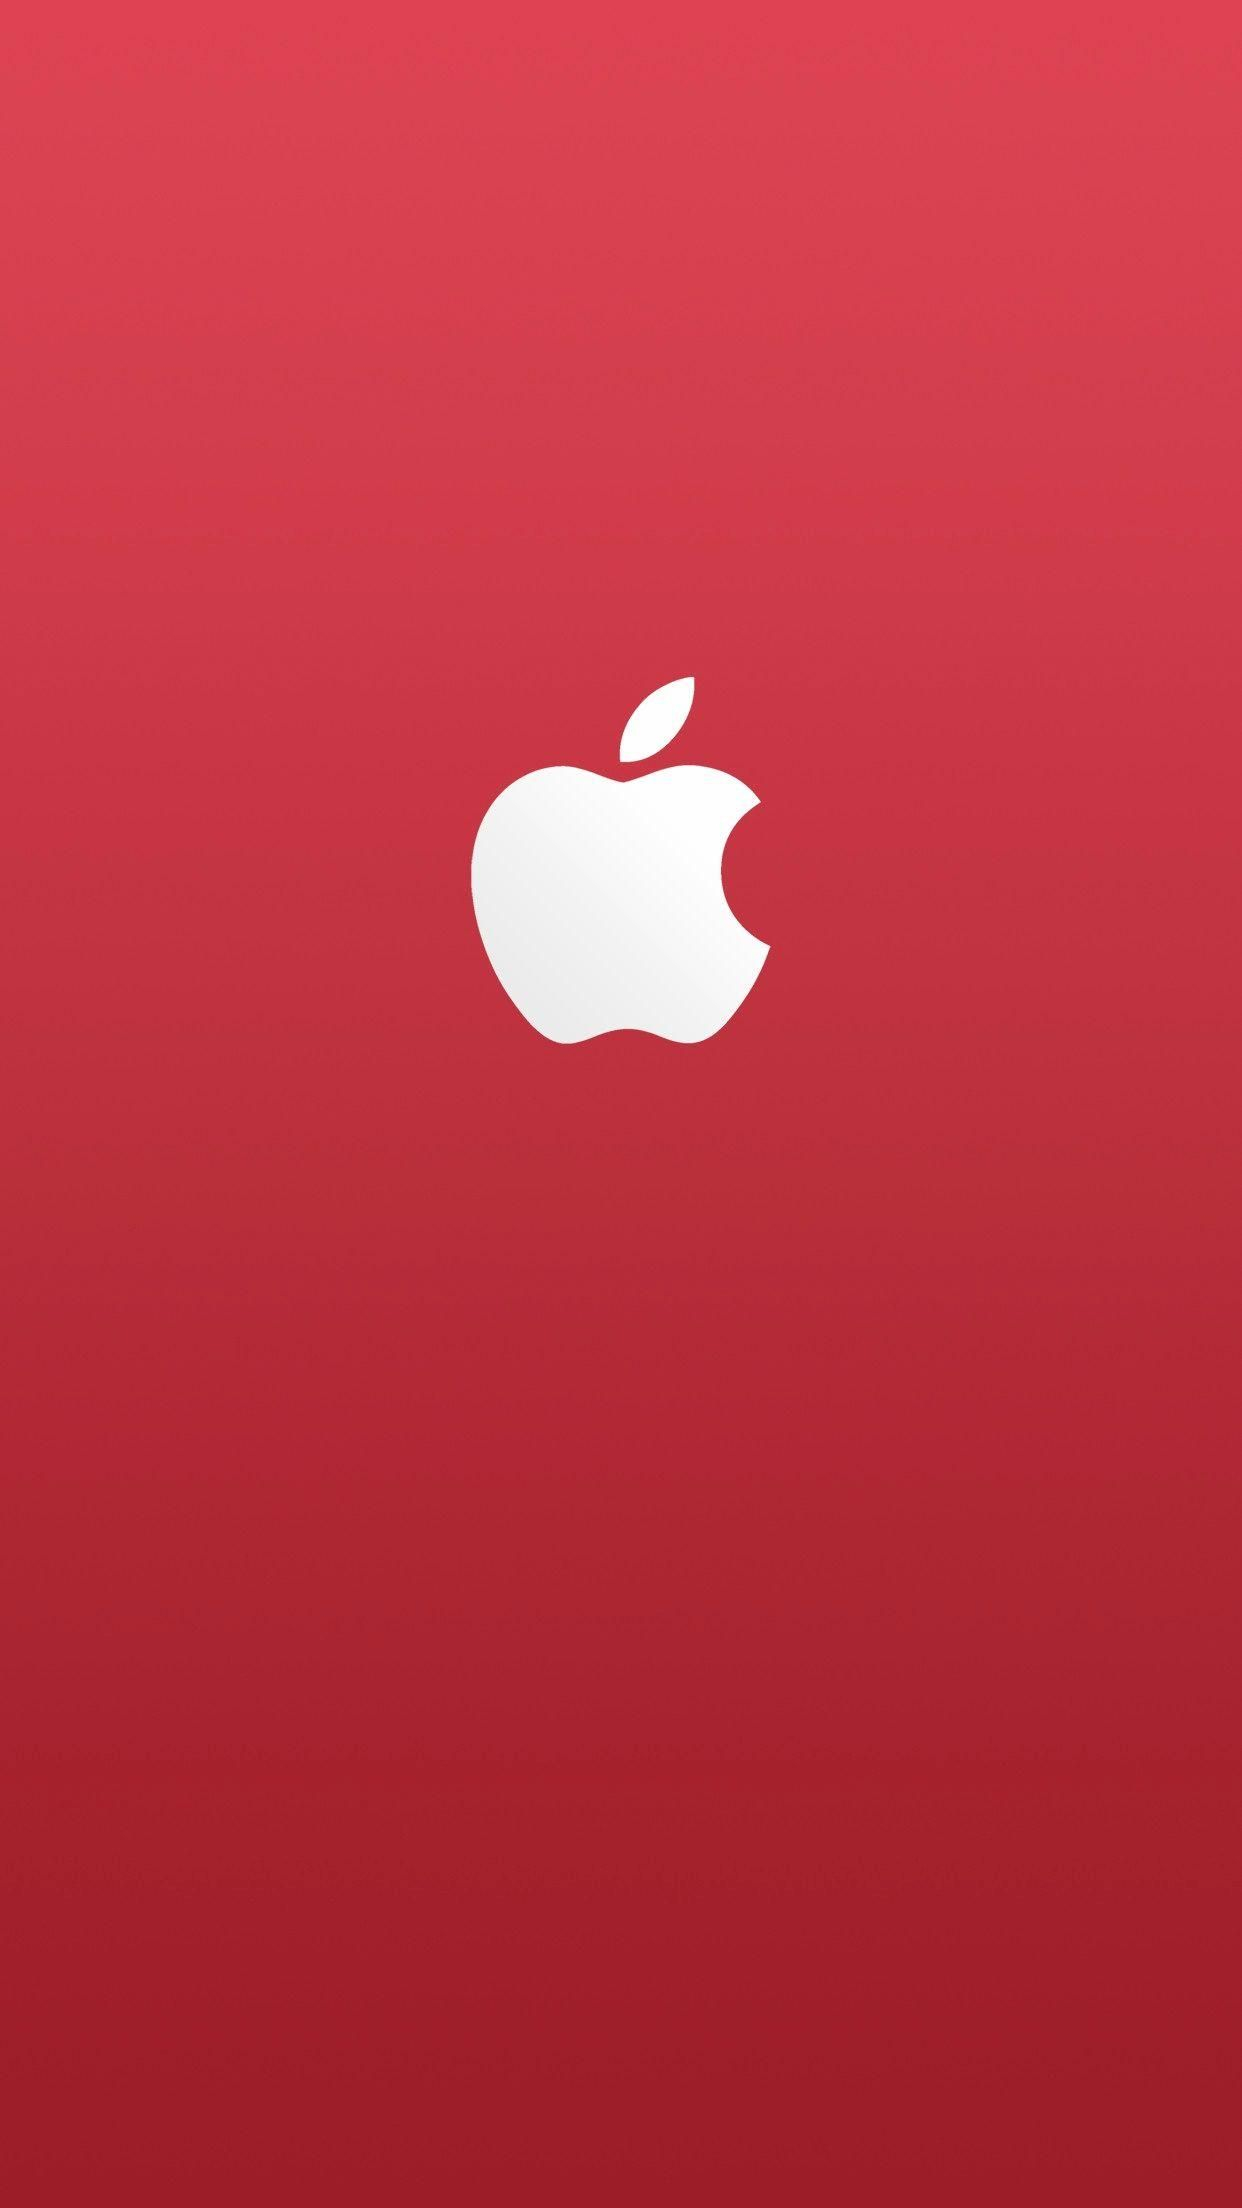 1242x2208 Iphone Xr Wallpaper 4k Red | mywallpapers site | Iphone wallpaper, Apple logo wallpaper iphone, Apple wallpaper iphone